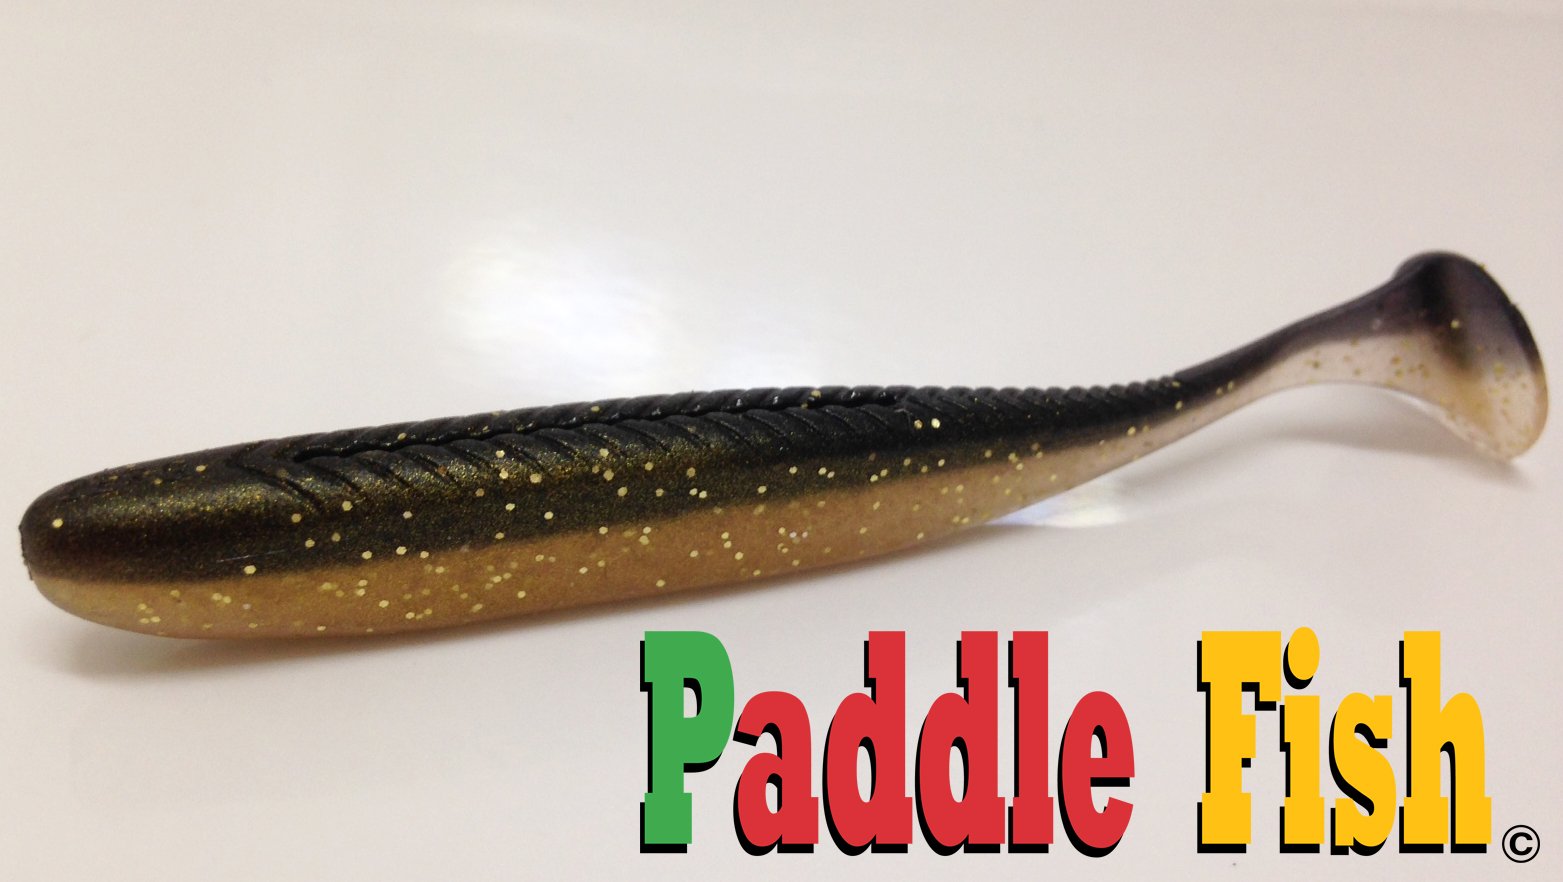 Paddle Fish Mini 2 inches Crappie Perch Fishing – Target Baits Leurres